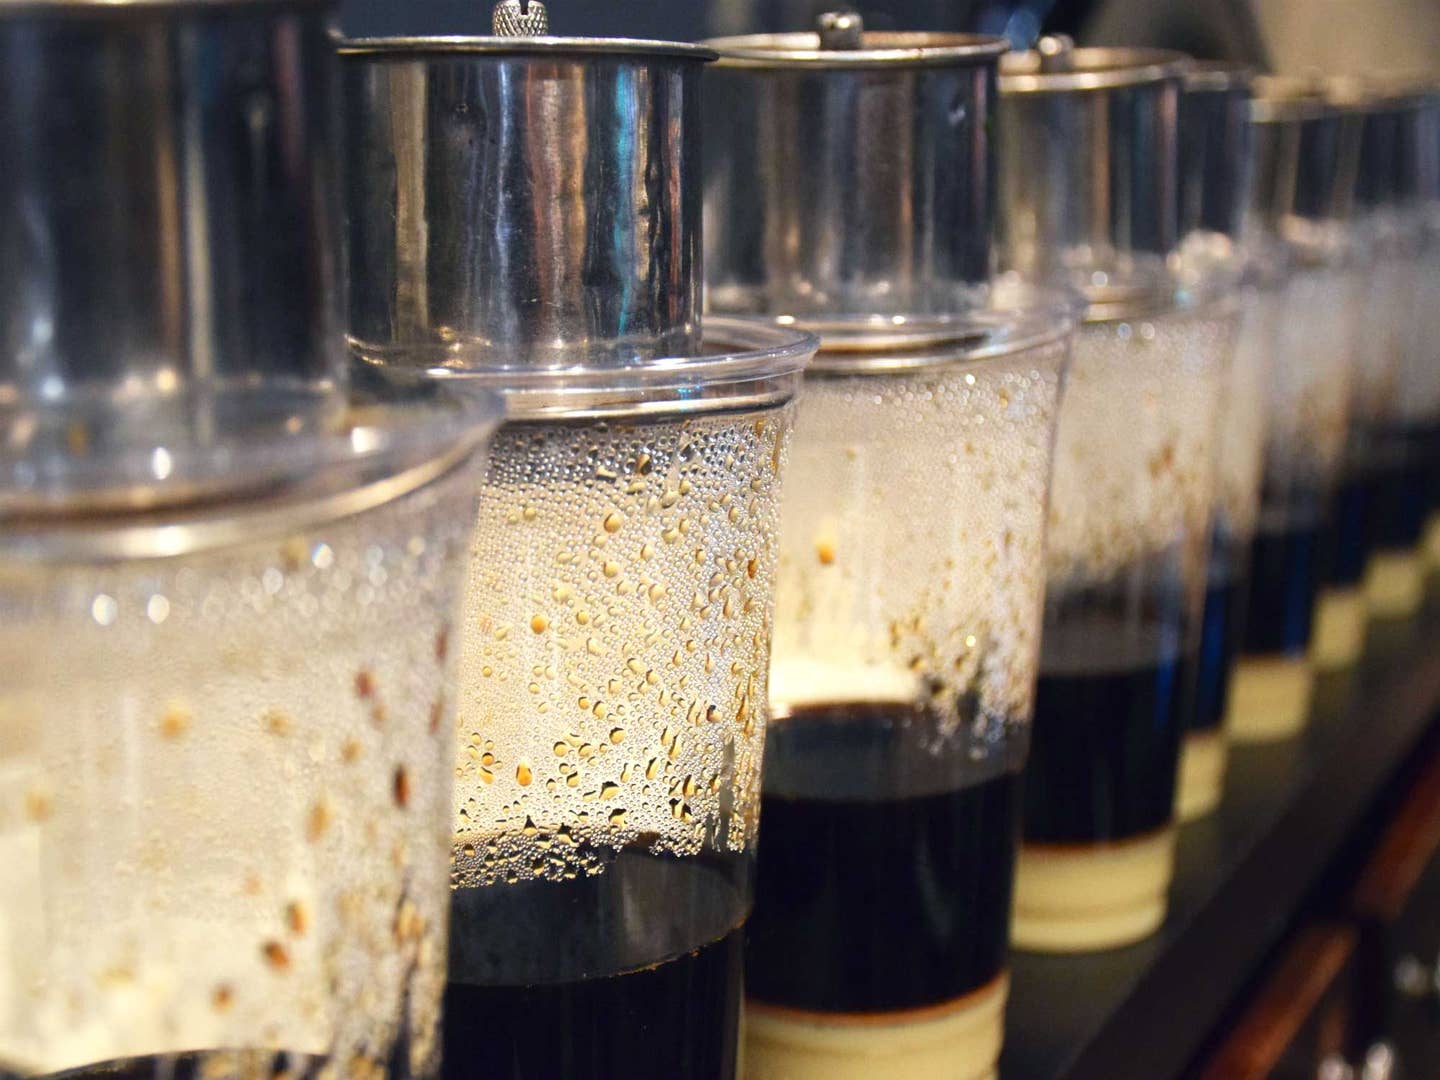 Houston is Crazy for Vietnamese Iced Coffee